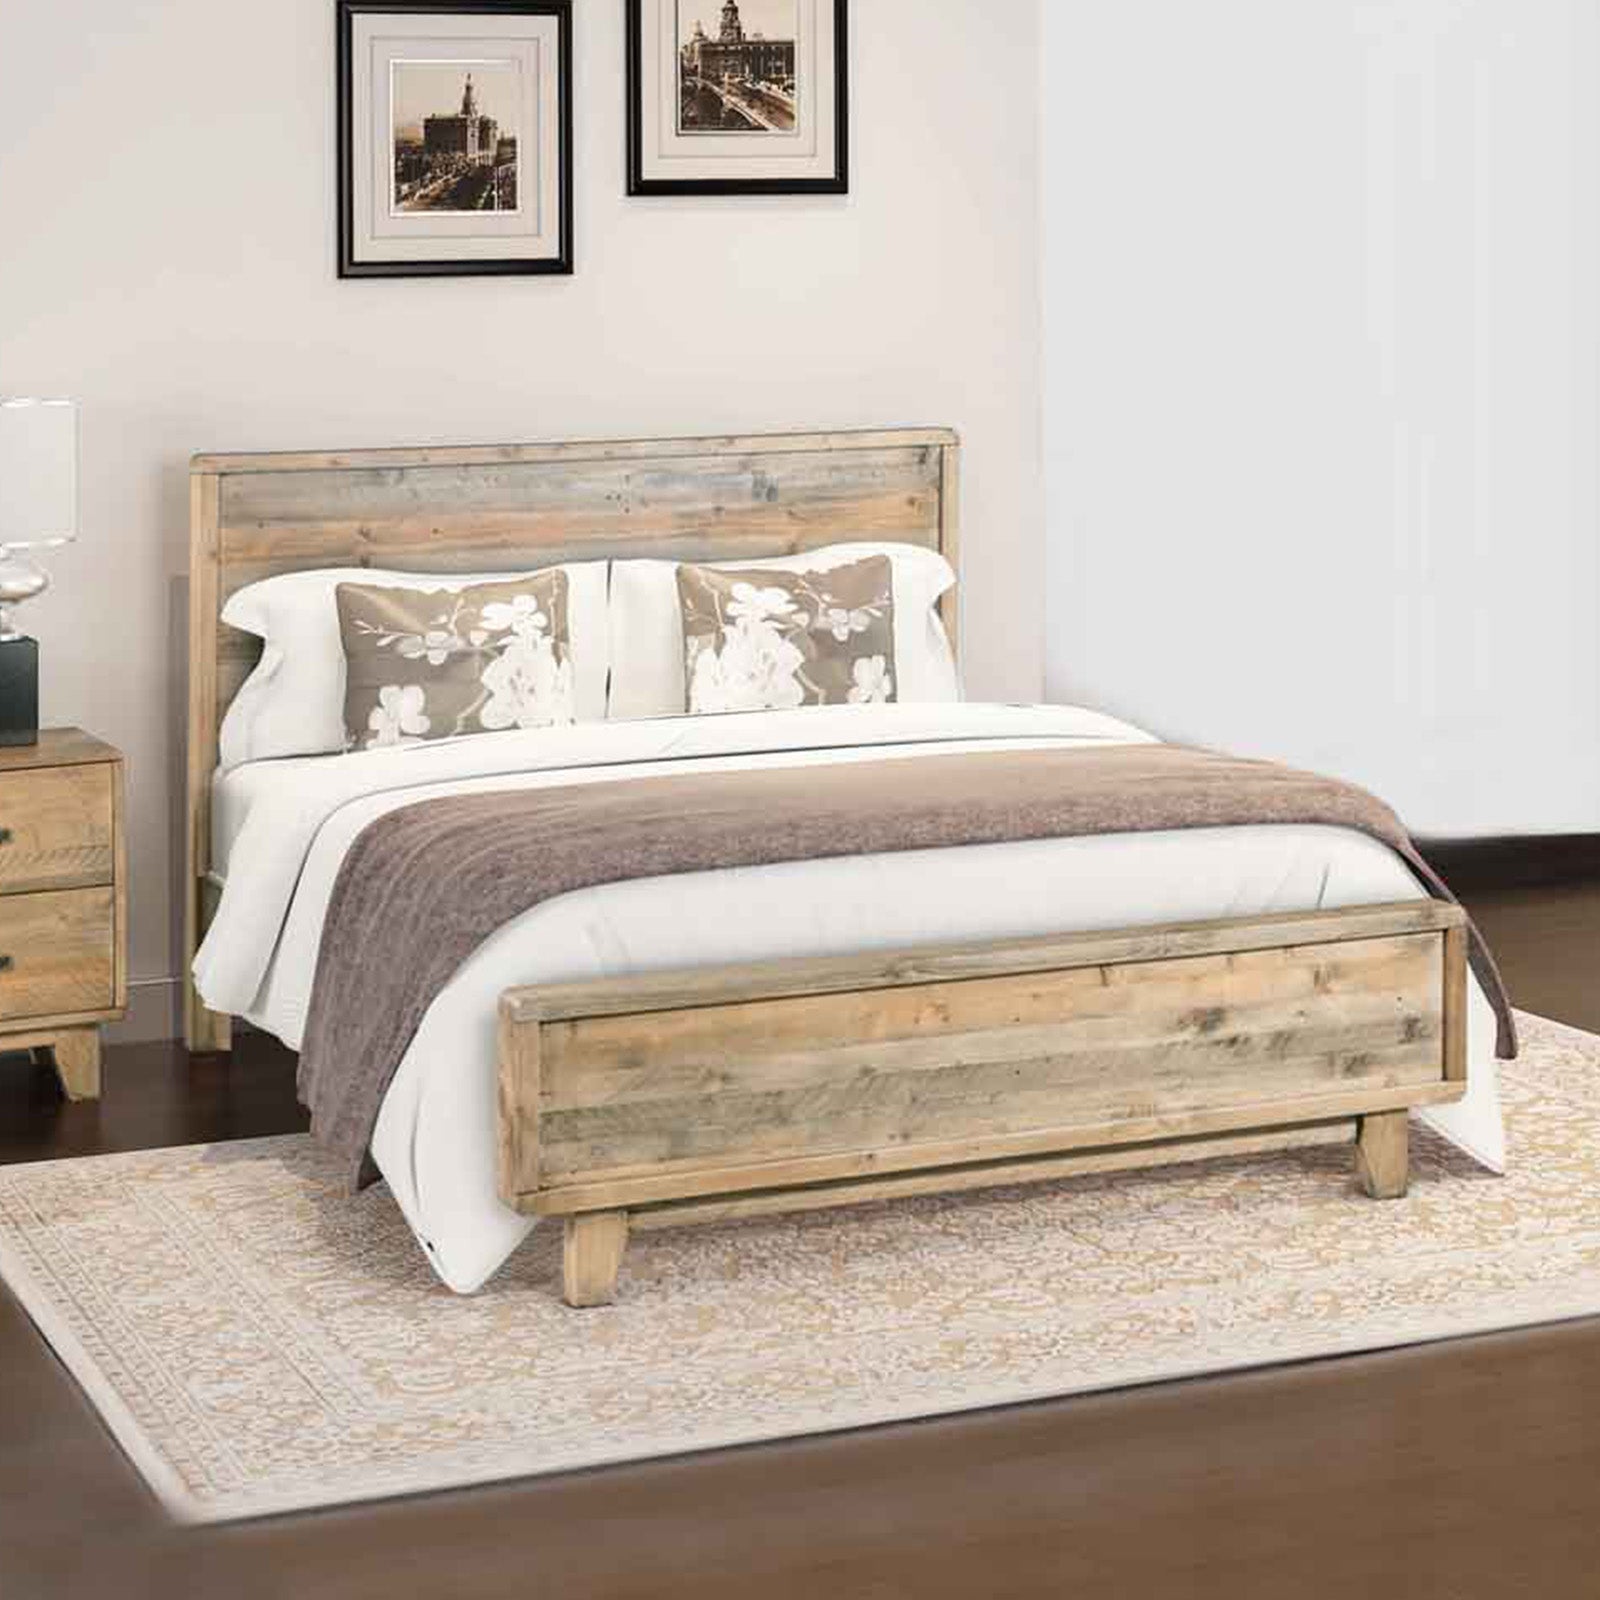 Wesley Double Size Wooden Bed Frame in Solid Wood Antique Design Light Brown